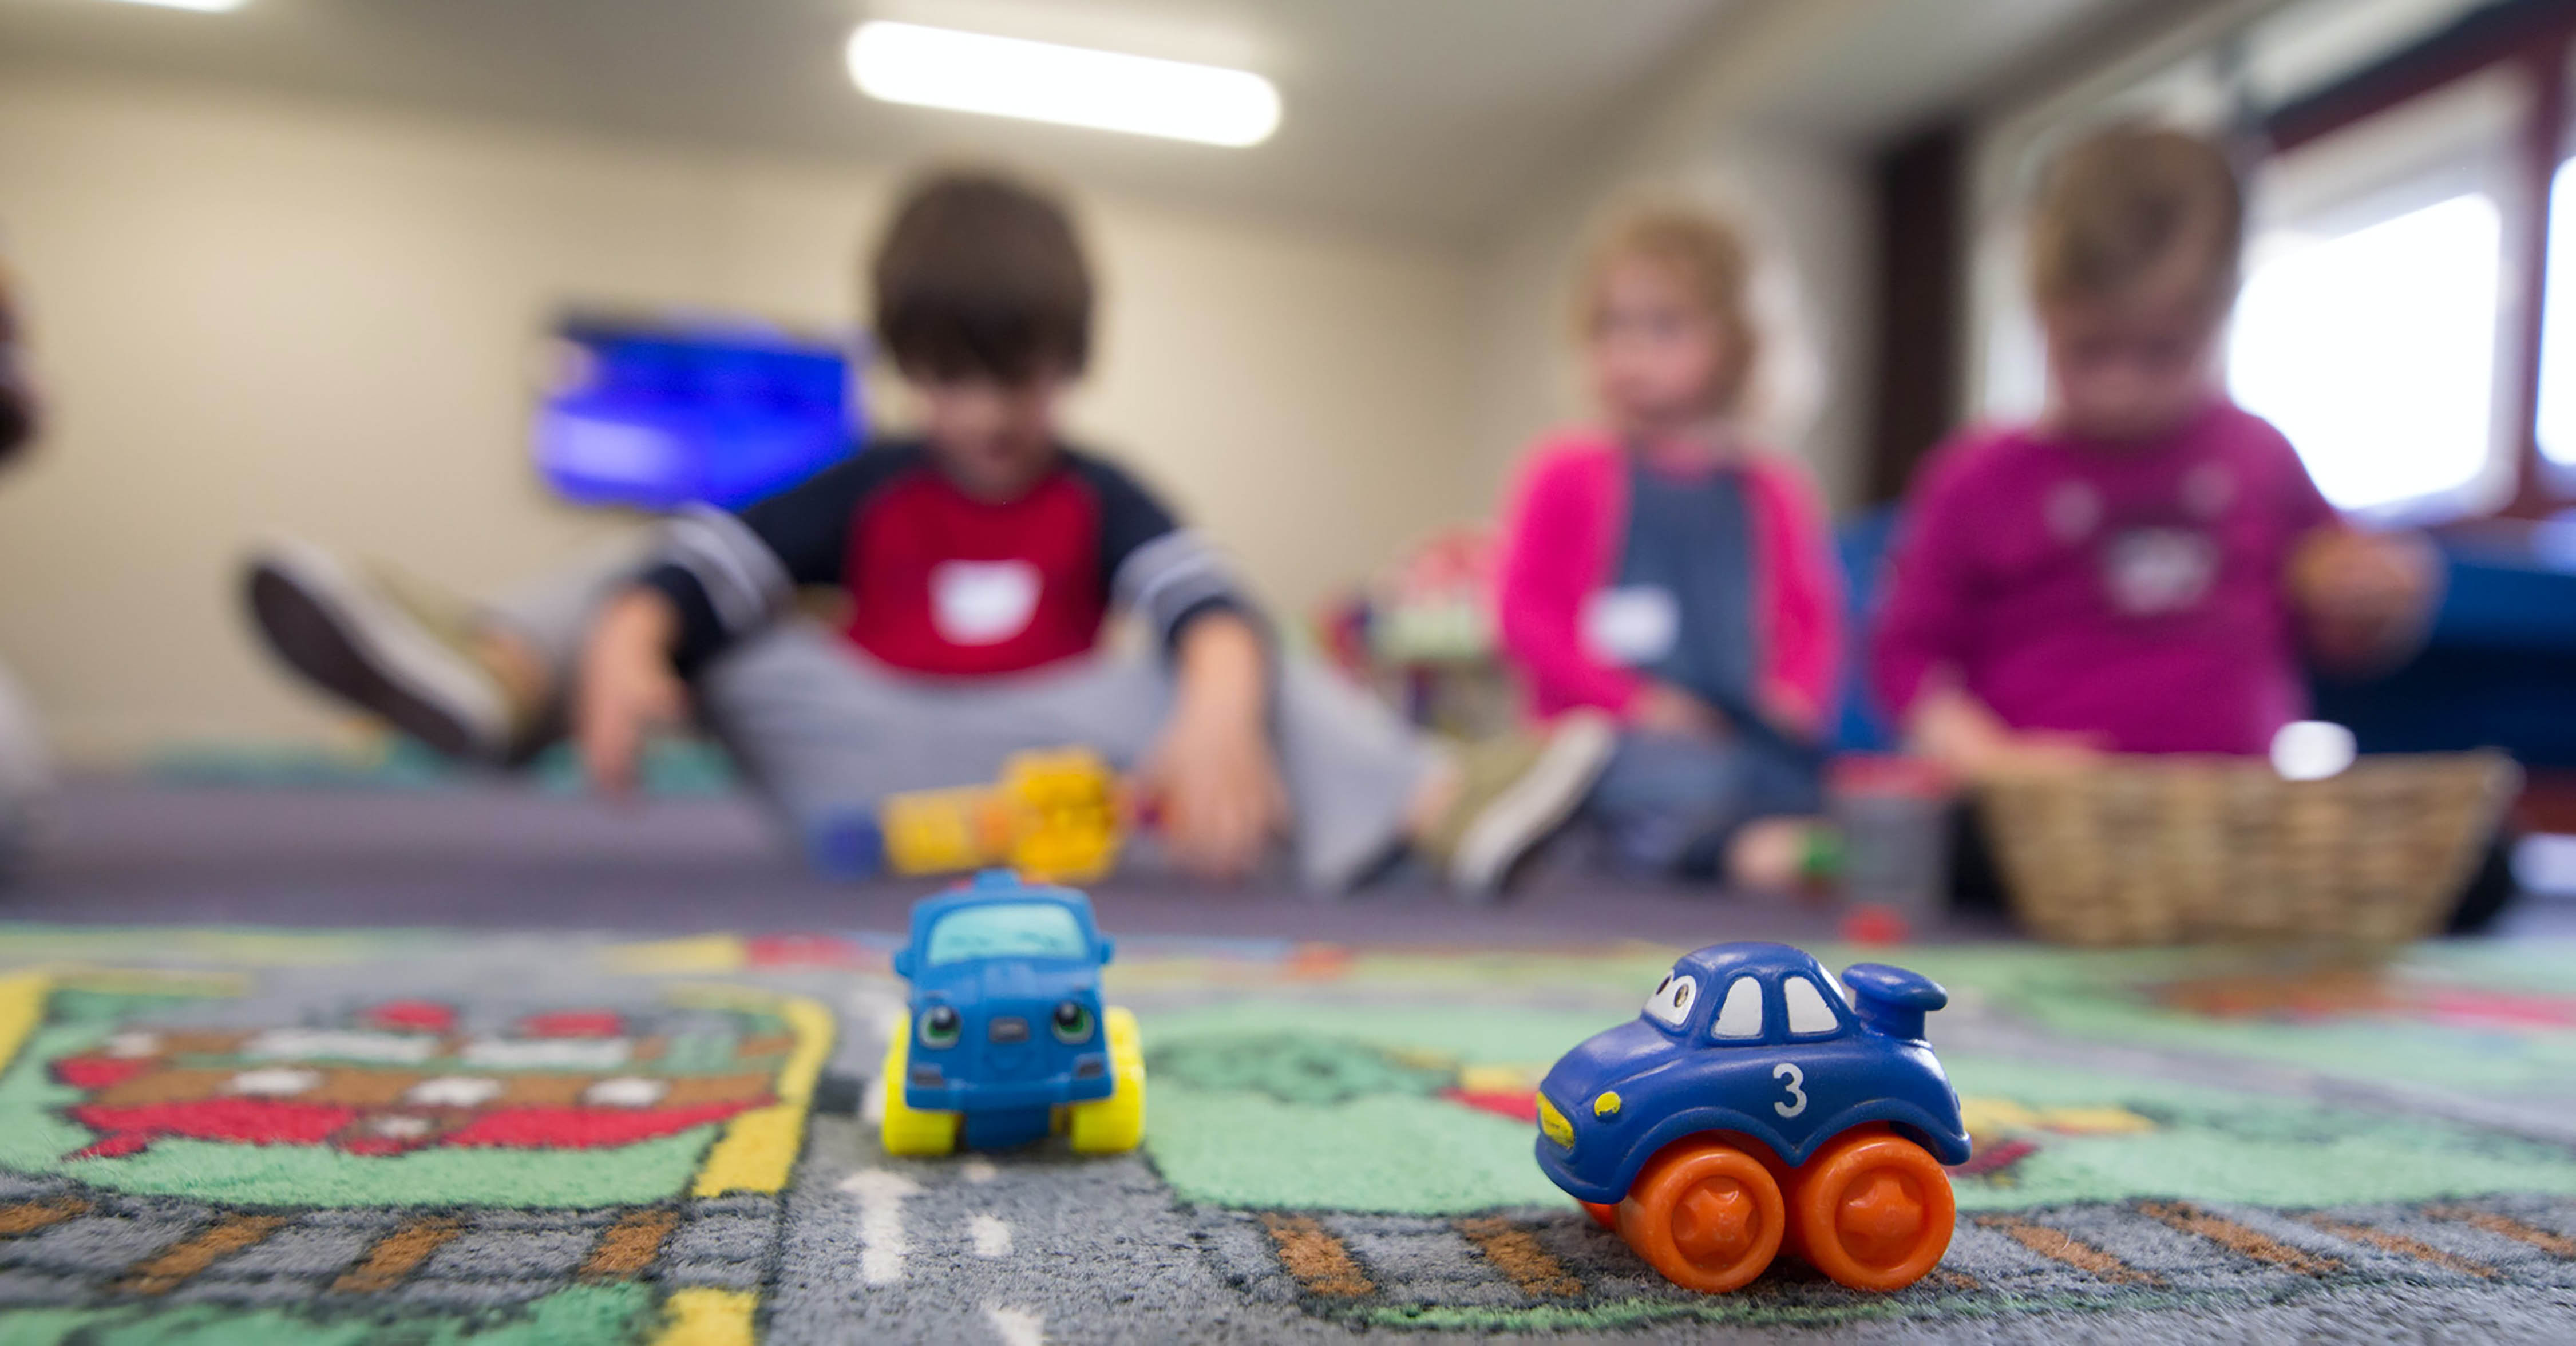 Three young children play on a carpet with toy cars in a classroom.